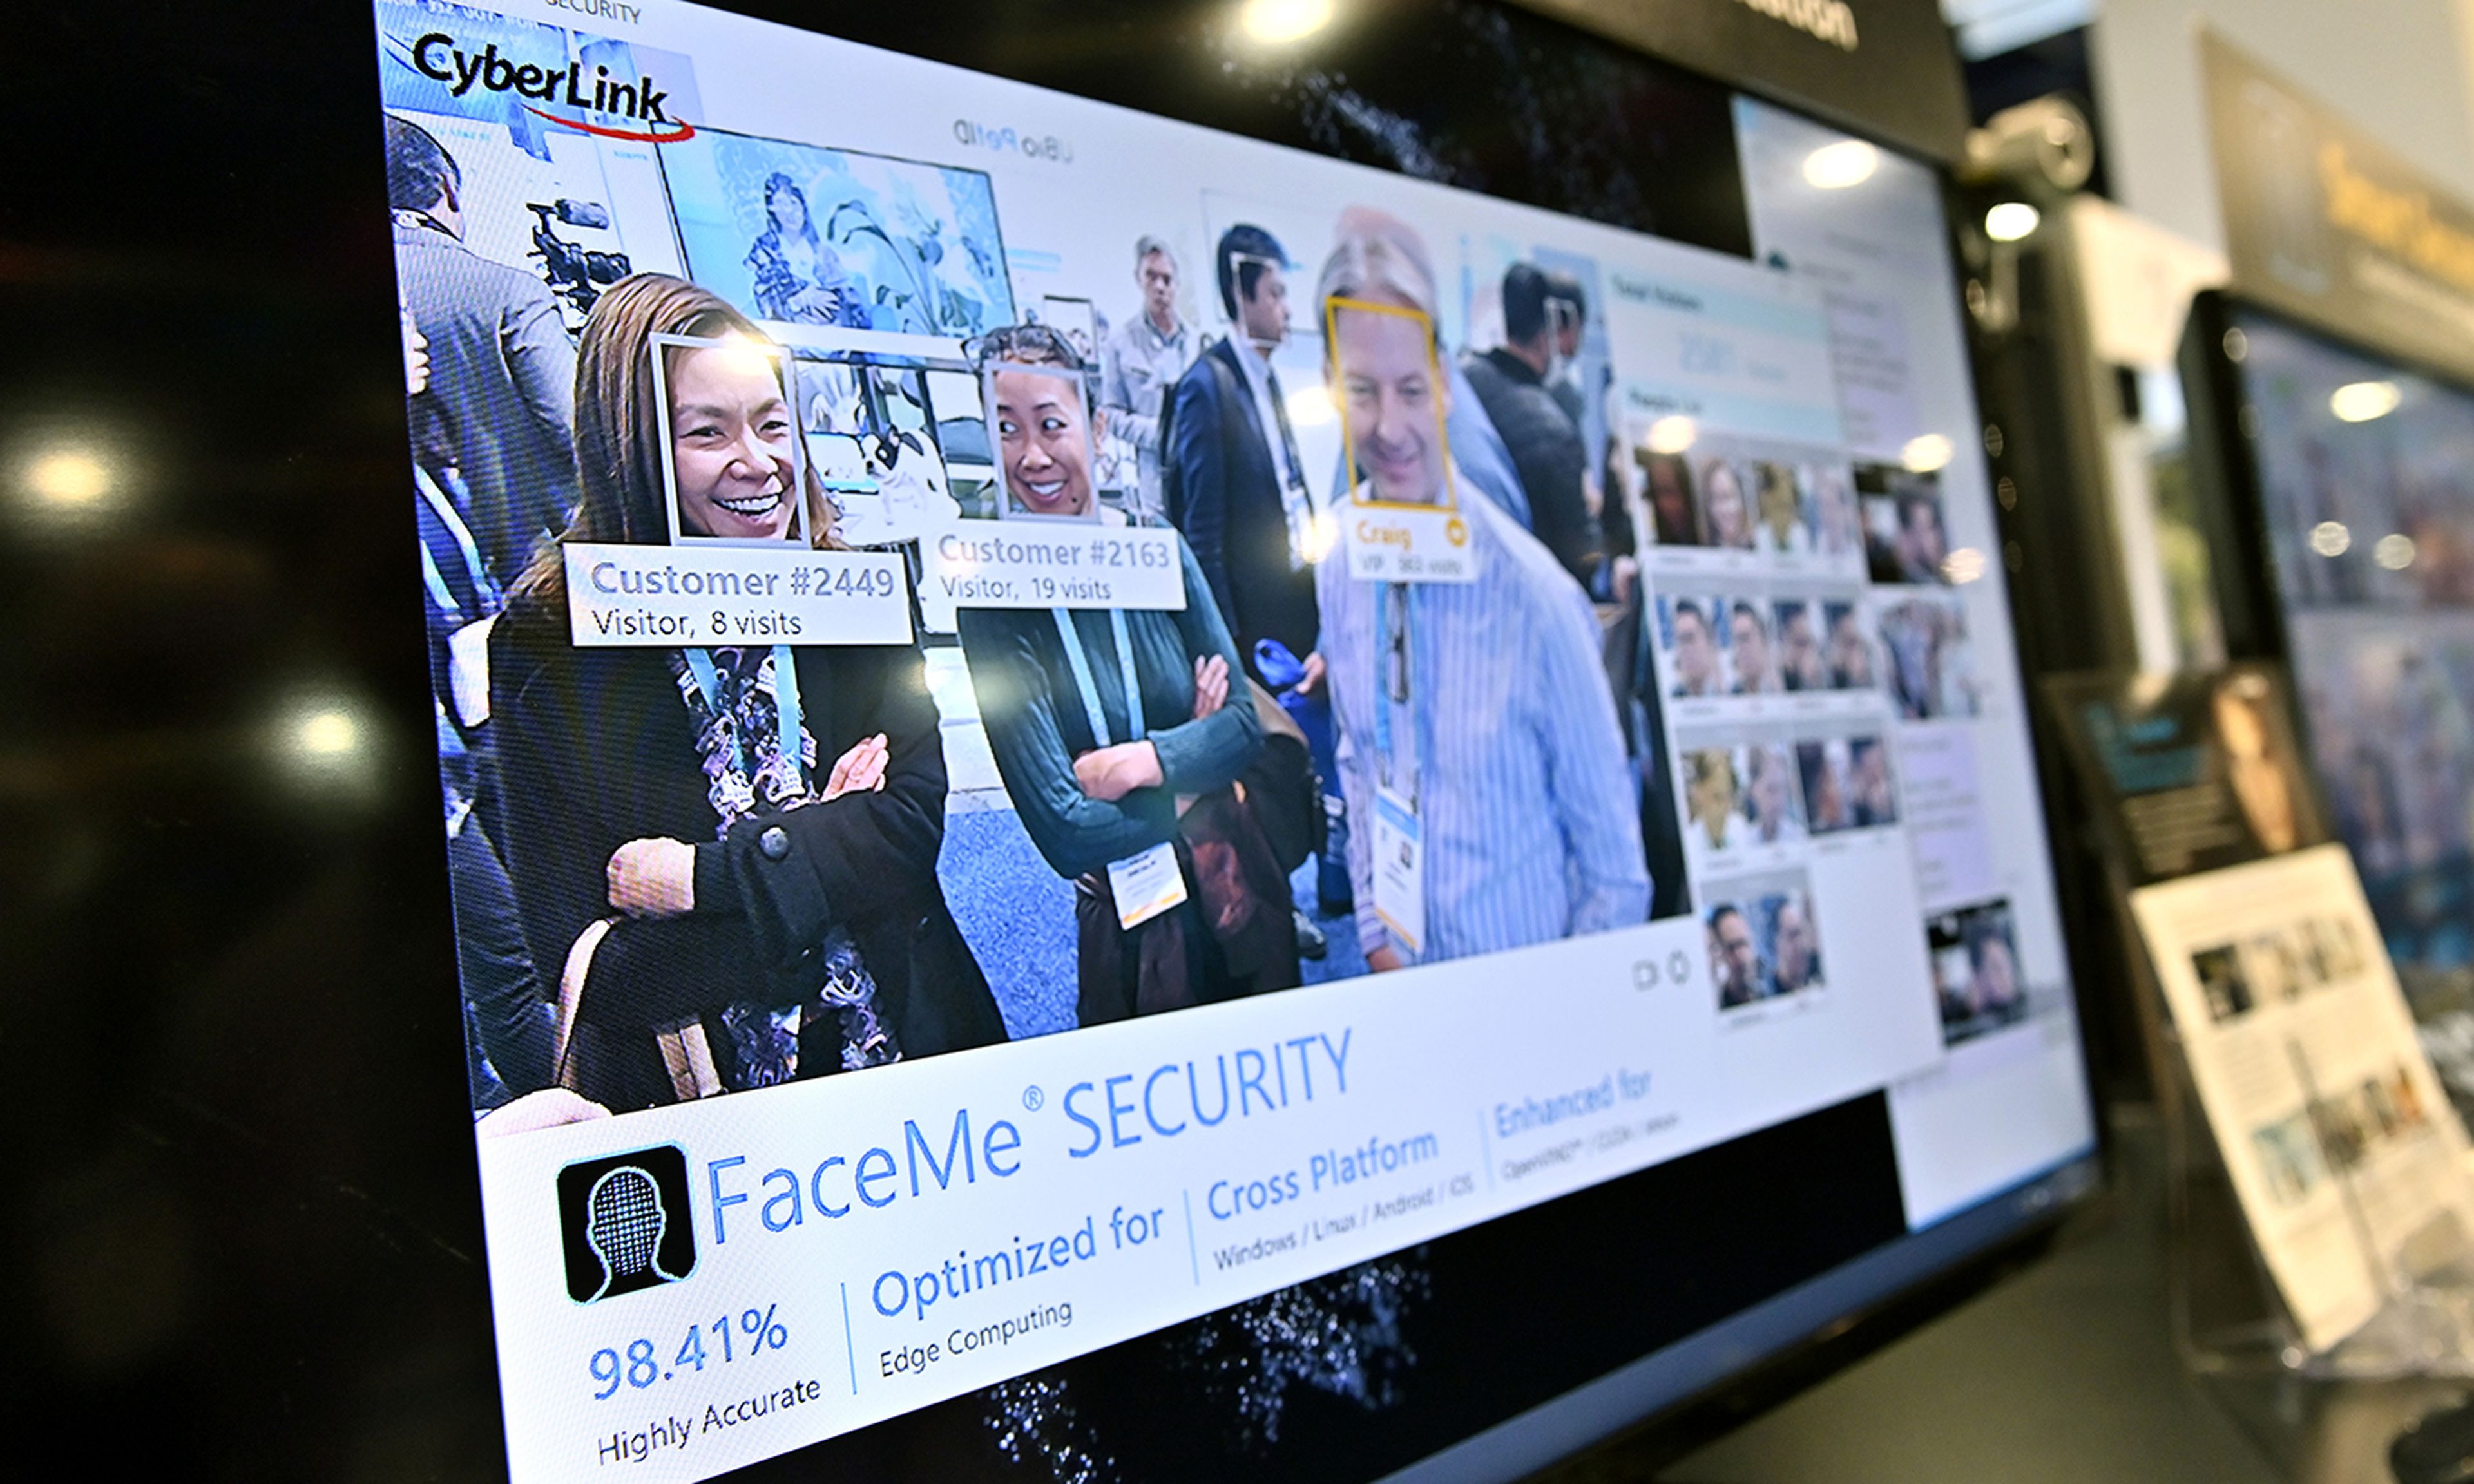 A video monitor displays attendees as their images are captured with CyperLink&#8217;s facial recognition during CES 2020 at the Las Vegas Convention Center on Jan. 8, 2020. (Photo by David Becker/Getty Images)